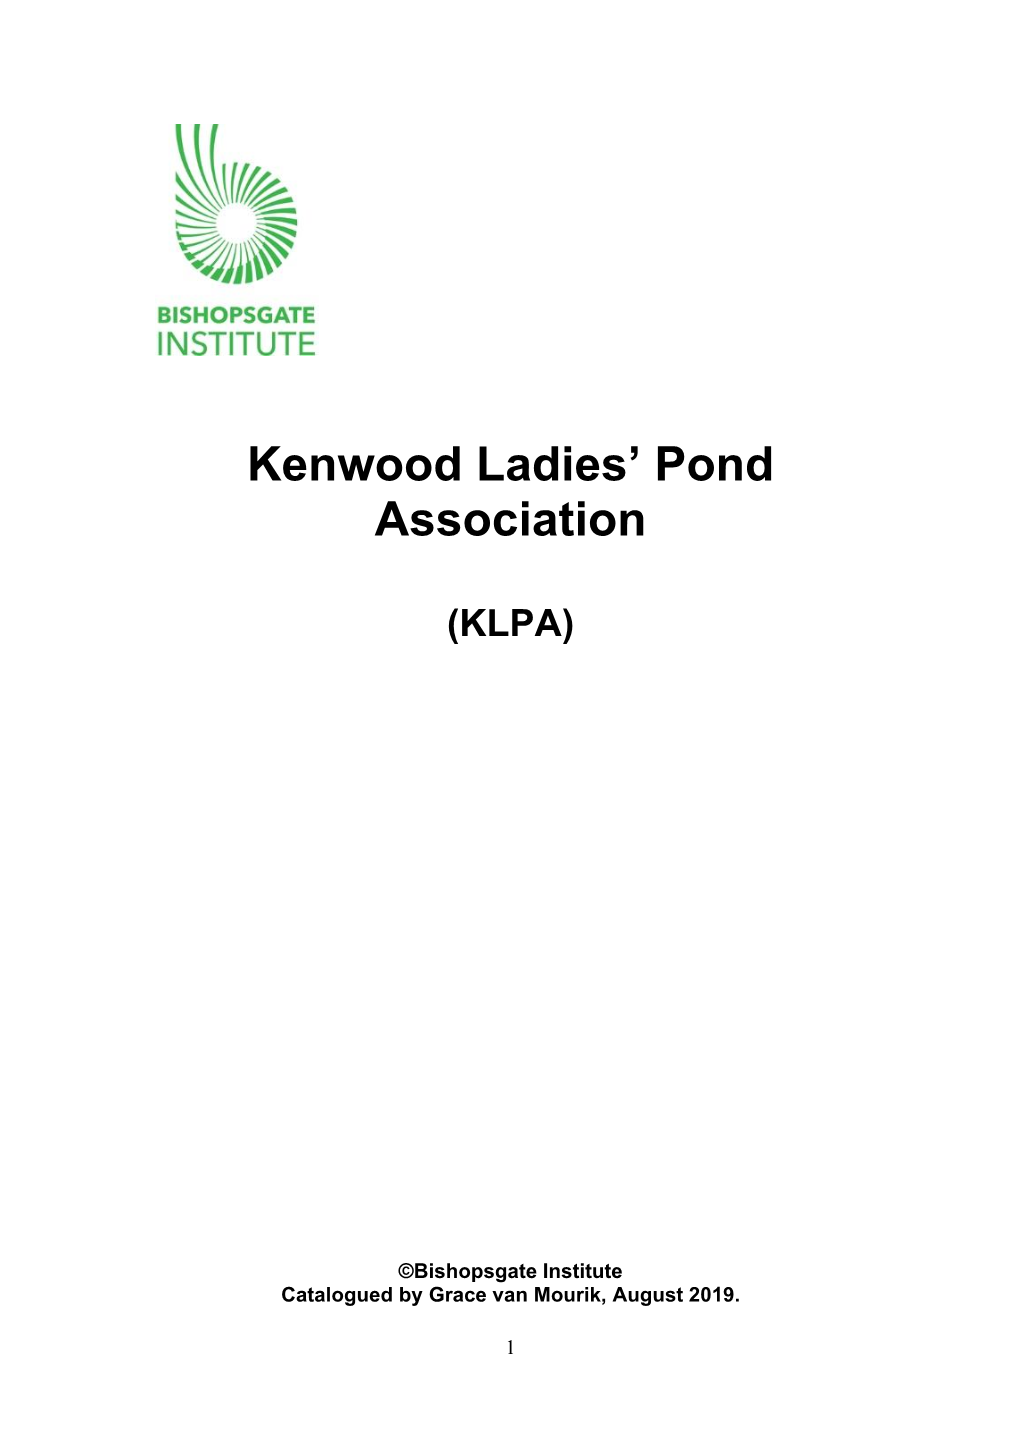 Kenwood Ladies' Pond Association (KLPA) Is a Voluntary Organisation of Women Who Care About the Ladies' Pond on Hampstead Heath